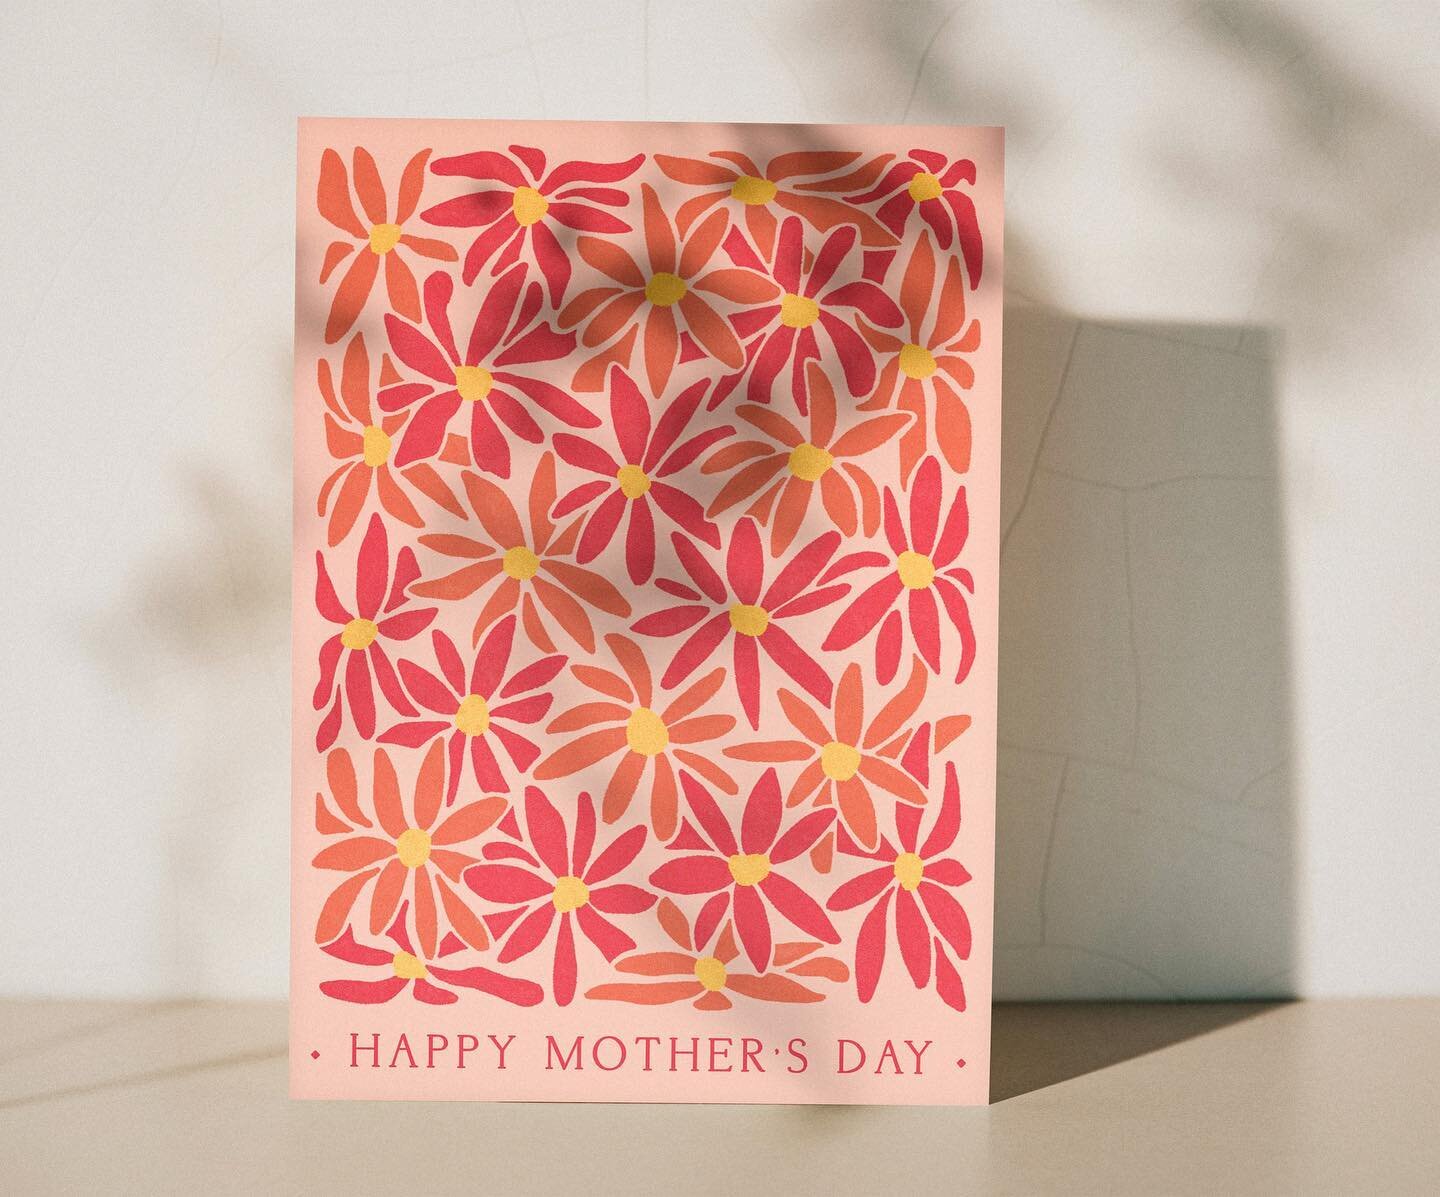 NEW Mother&rsquo;s Day cards available now on my website or over on @notonthehighstreet 🌺

#noths #nothspartner #notonthehighstreet #shopsmallleam #shopsmall #shoplocal #seeyouonsmithstreet #ProudlyPrinted #printedcom #mothersday #motheringsunday #b